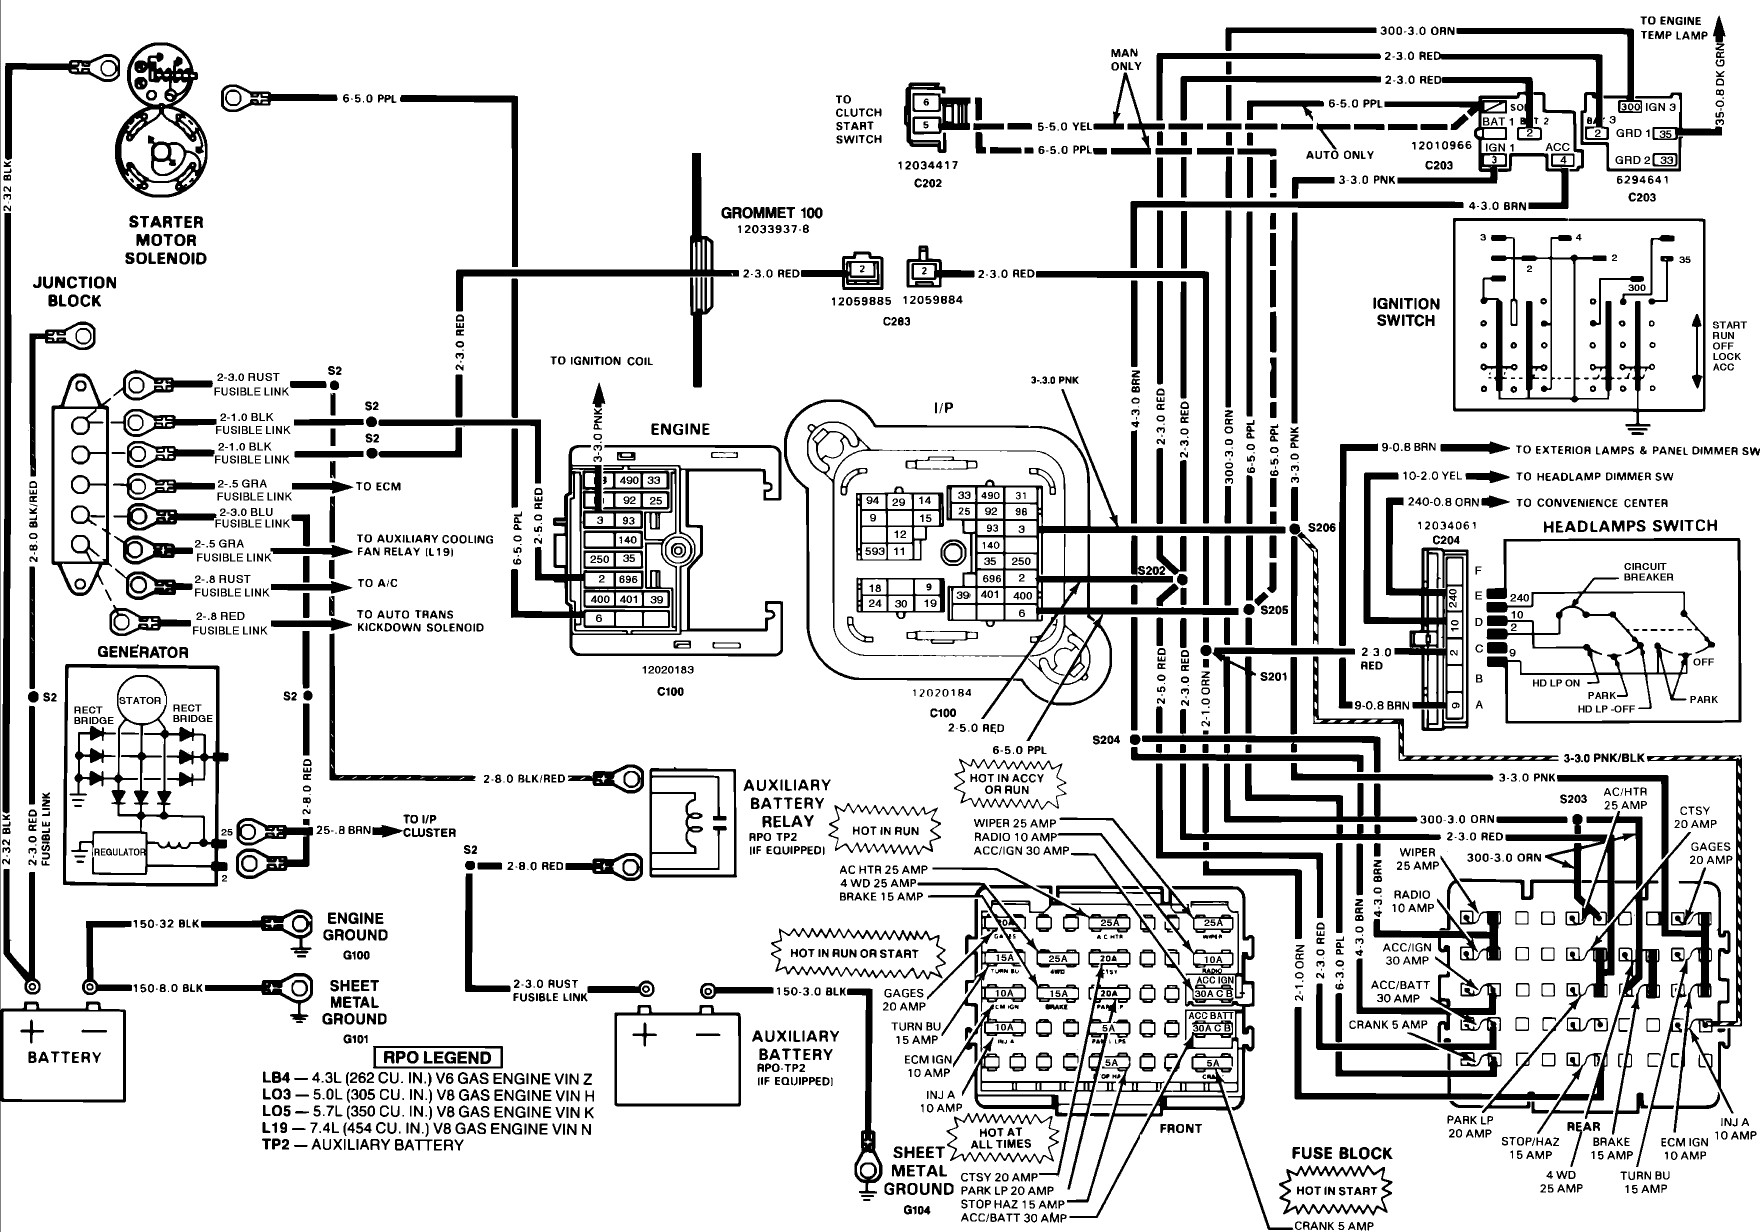 Chevy 3 4 Engine Diagram Lines Diagram for 1994 5 7 350 Chevy Free Image Wiring Diagram Of Chevy 3 4 Engine Diagram